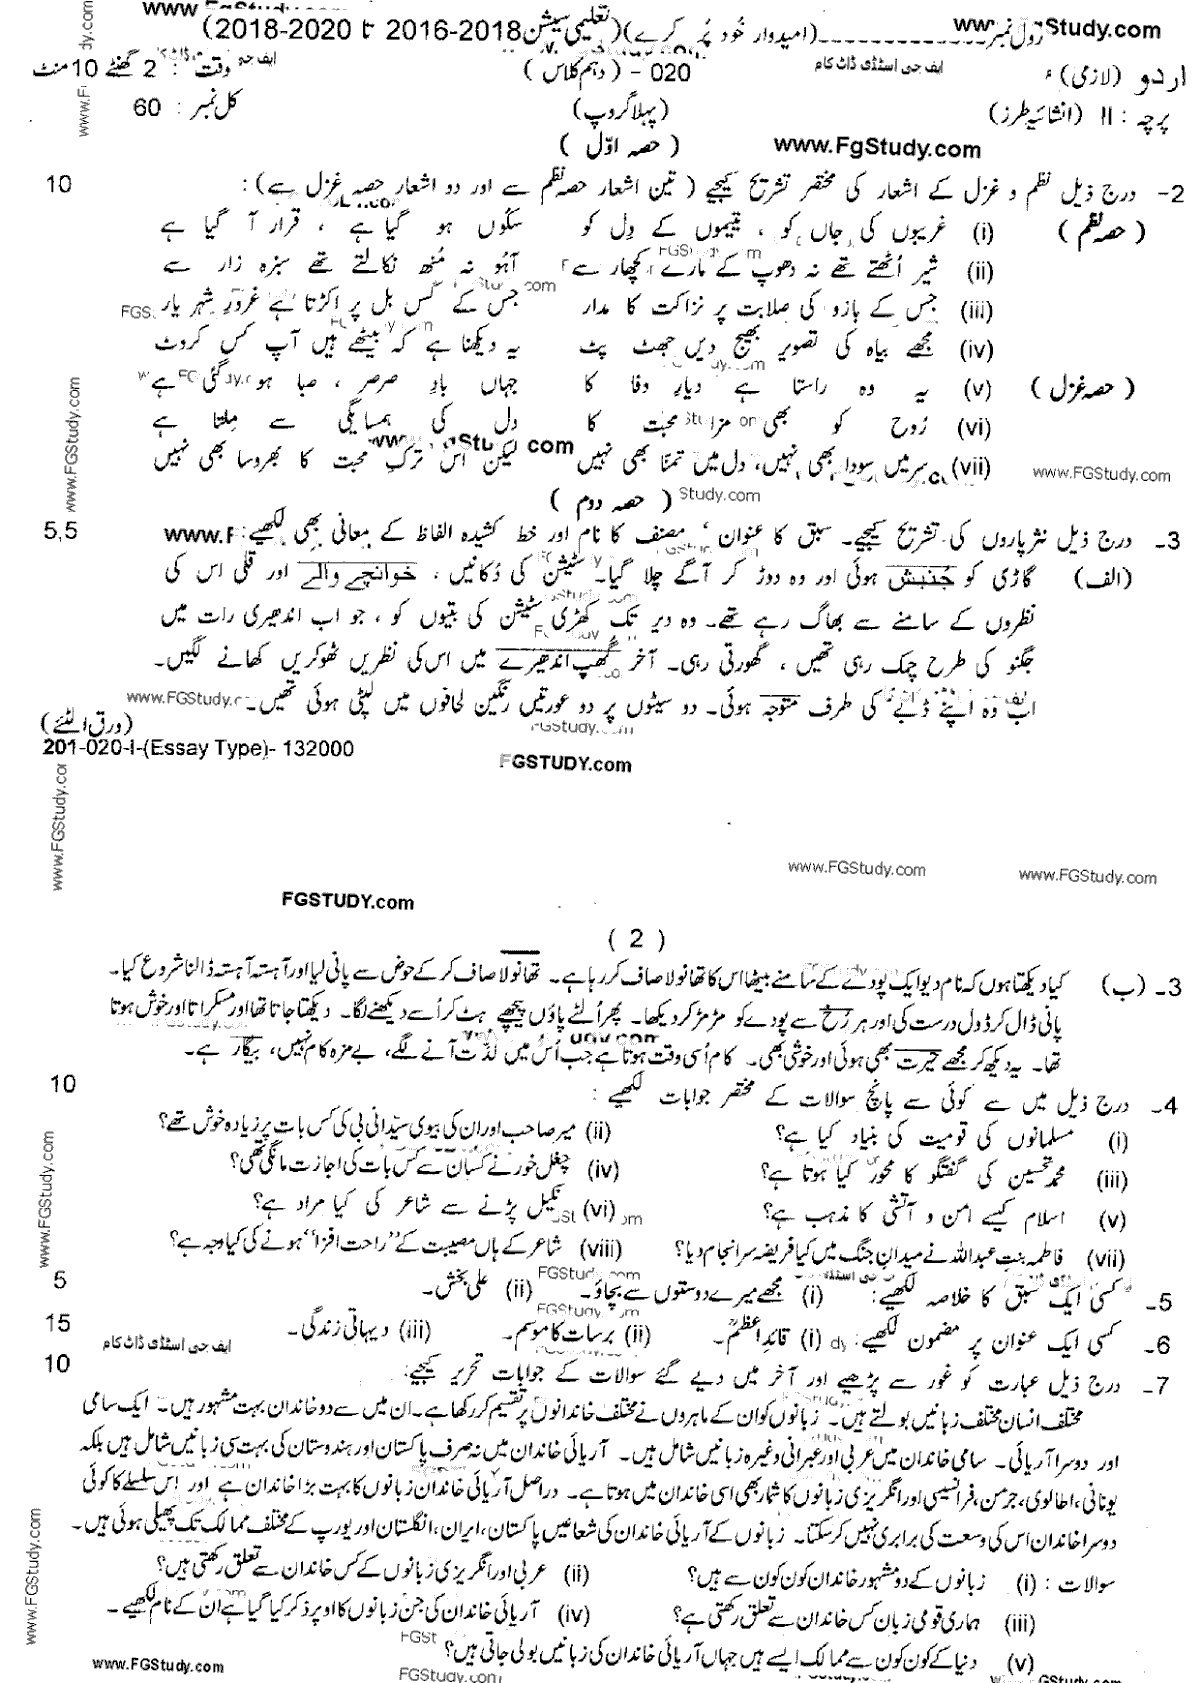 Urdu Group 1 subjective 10th Class Past Papers 2020